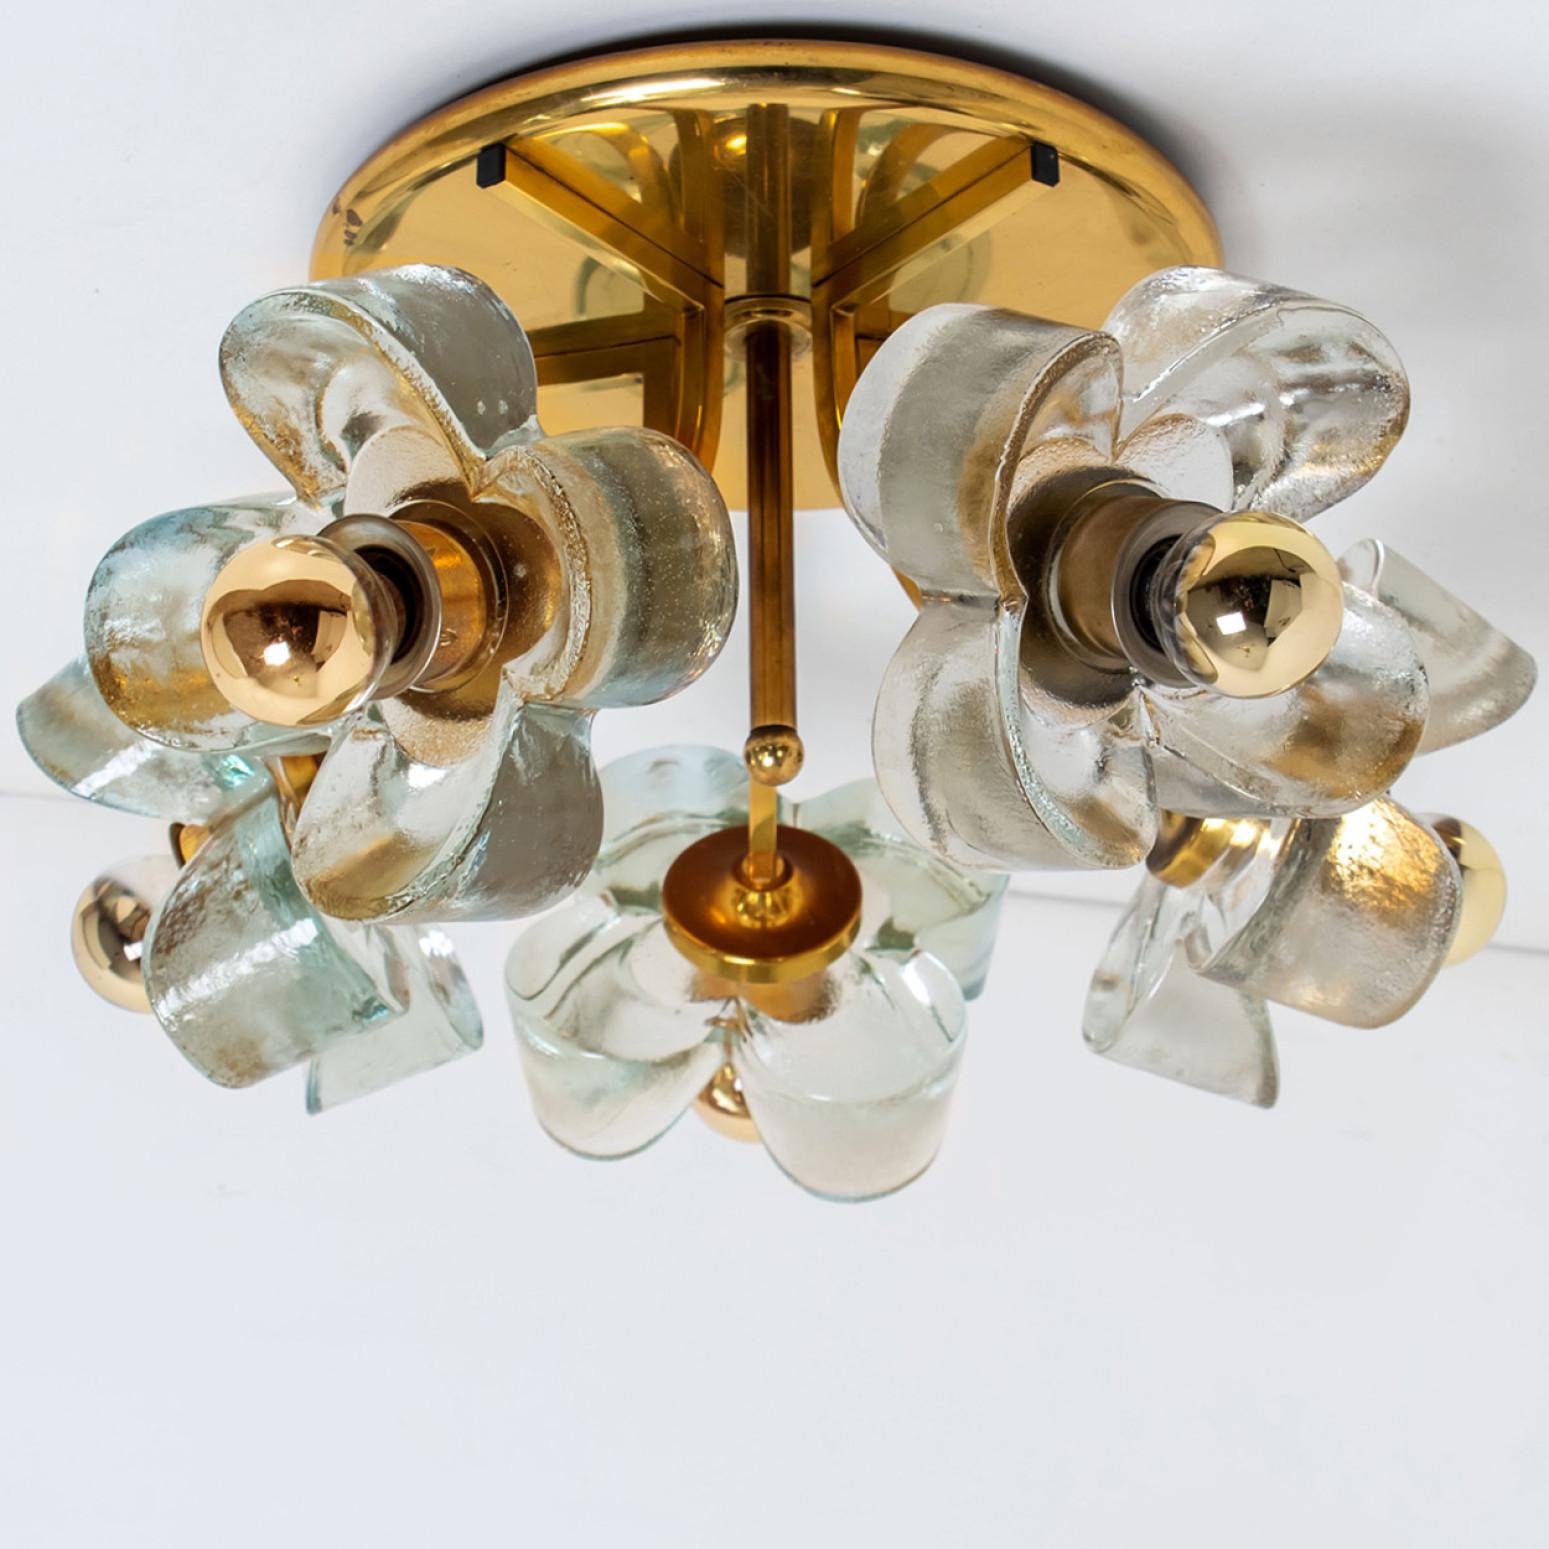 A wonderful flower flush mount by Sische Lighting, circa 1970s, Germany.
The flush mount is composed of six glass flower shades attached to a round brass base. High end piece from the 20th century.

The flush illuminates a warm-light due to the